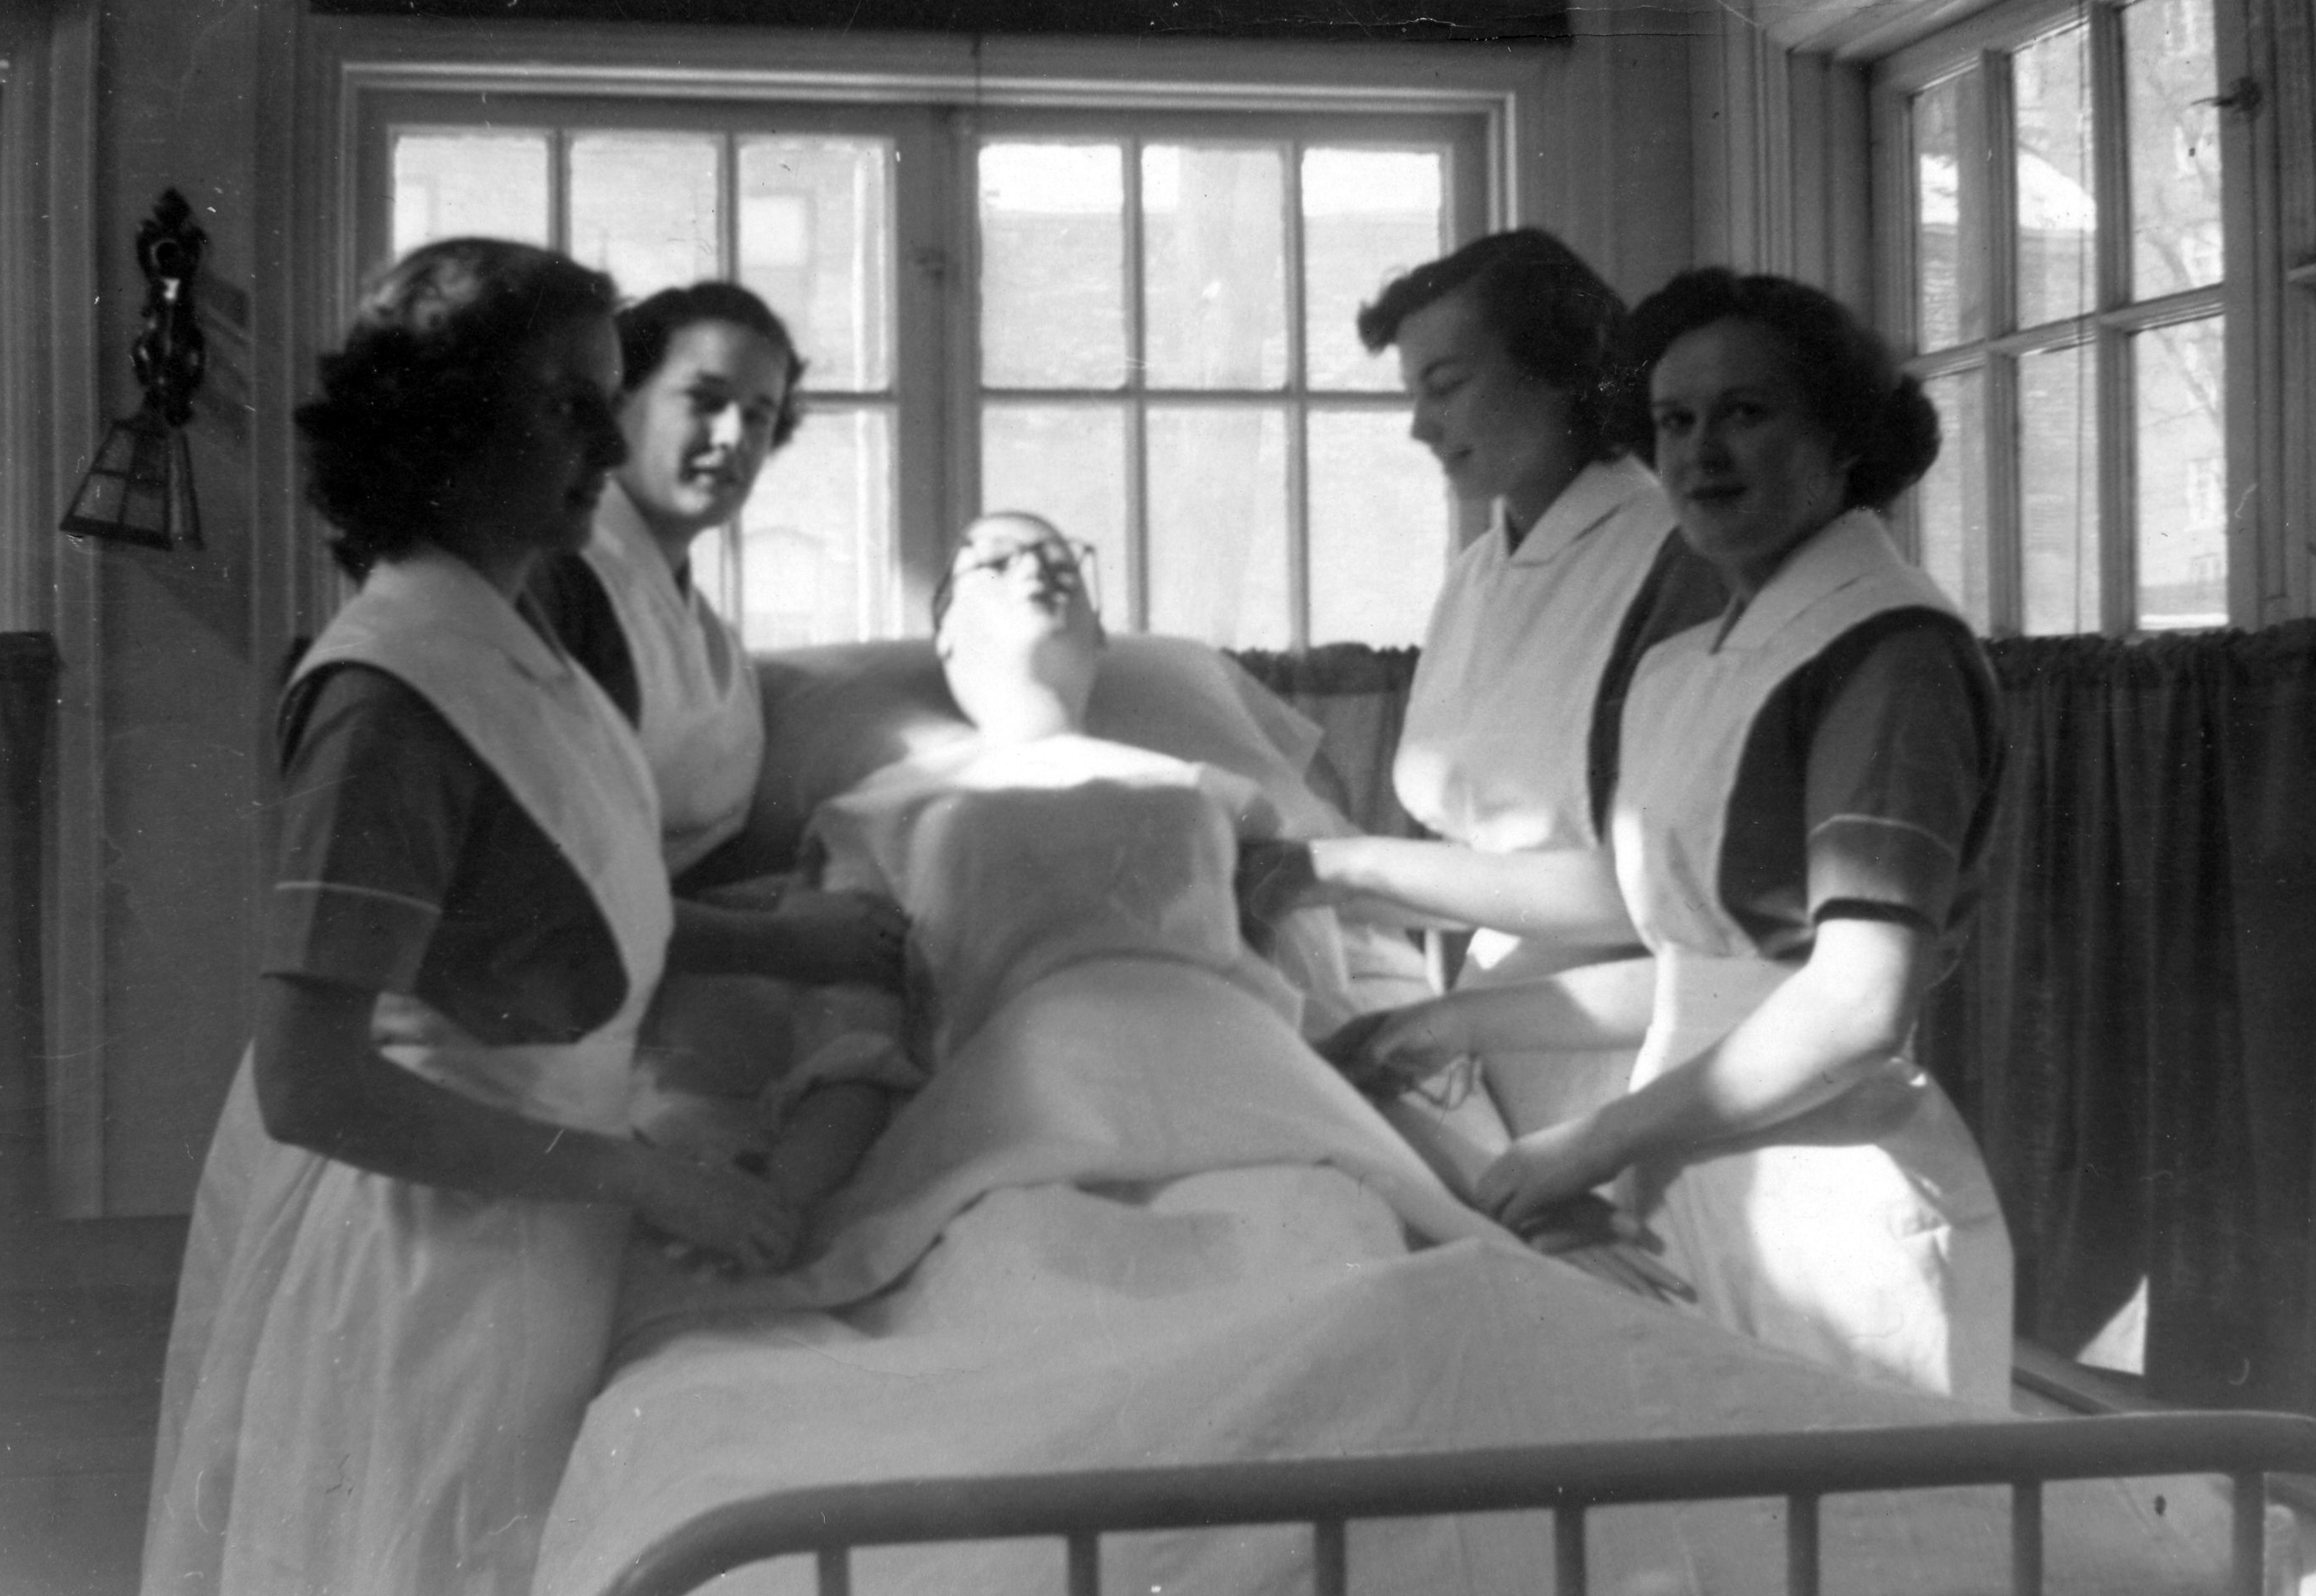 Four women in nurses' uniforms without caps surround a bed holding a mannequin.